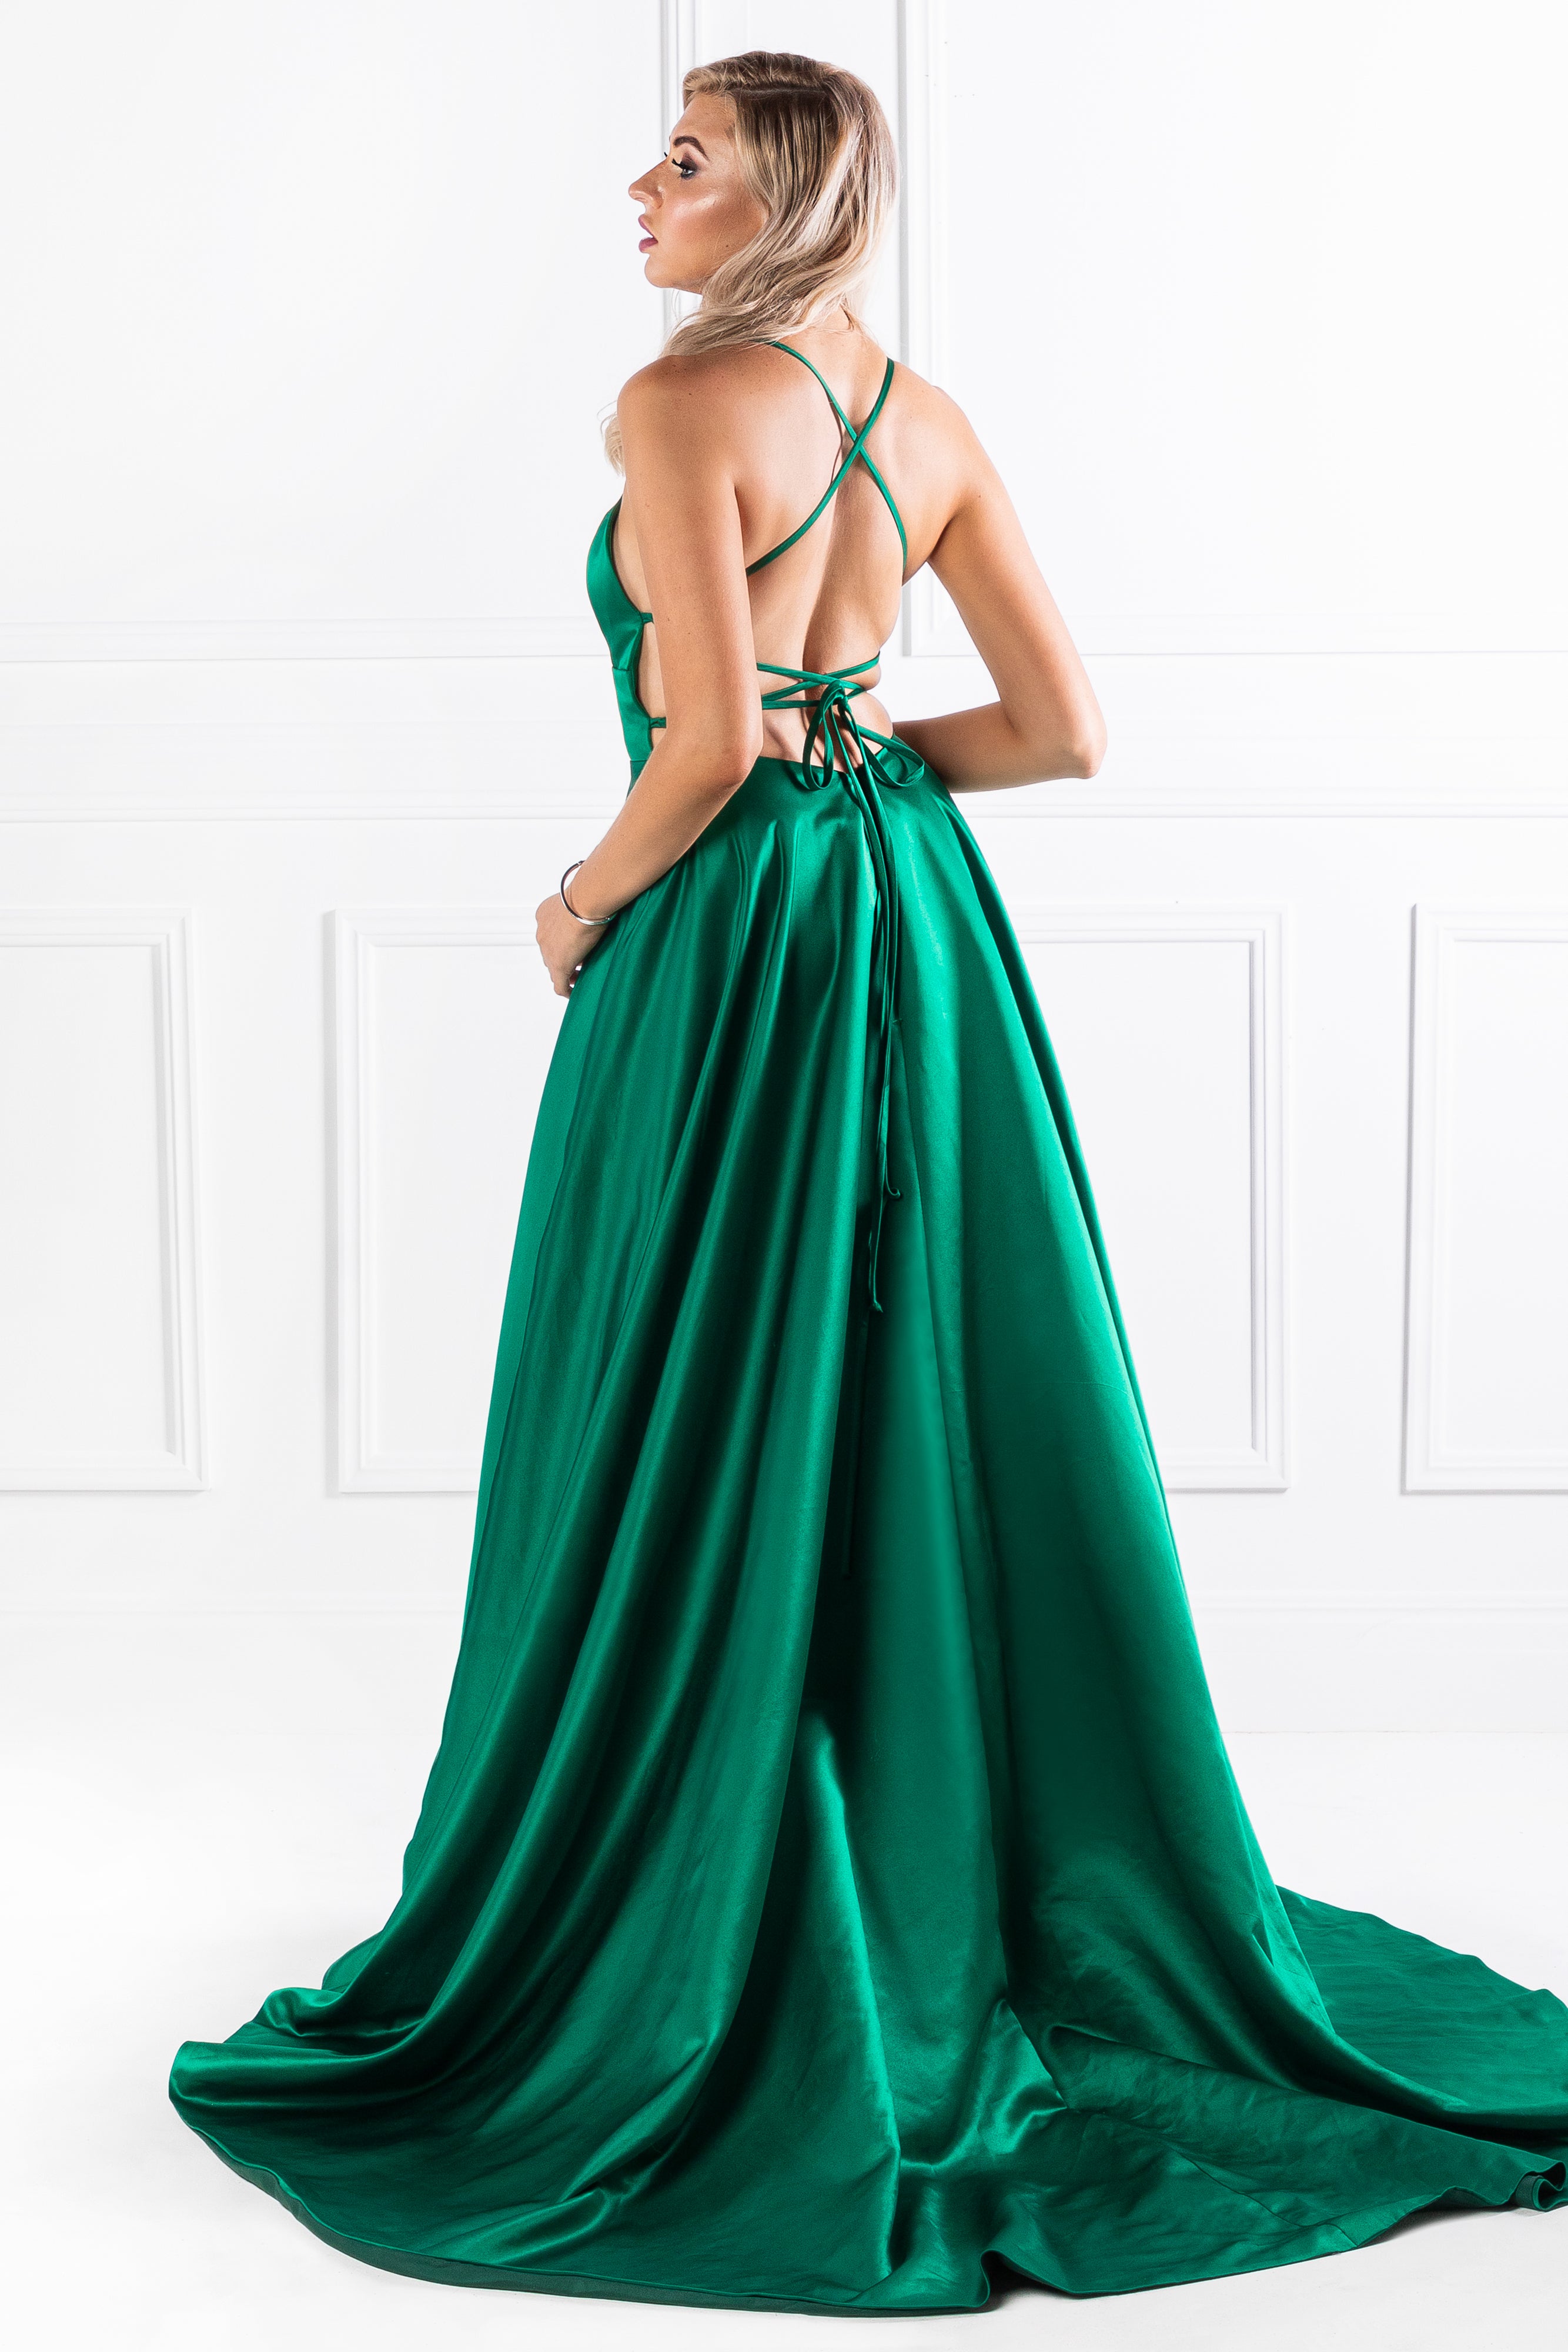 SHERRI Emerald Green Lace Up Back Satin Formal Gown {vendor} AfterPay Humm ZipPay LayBuy Sezzle